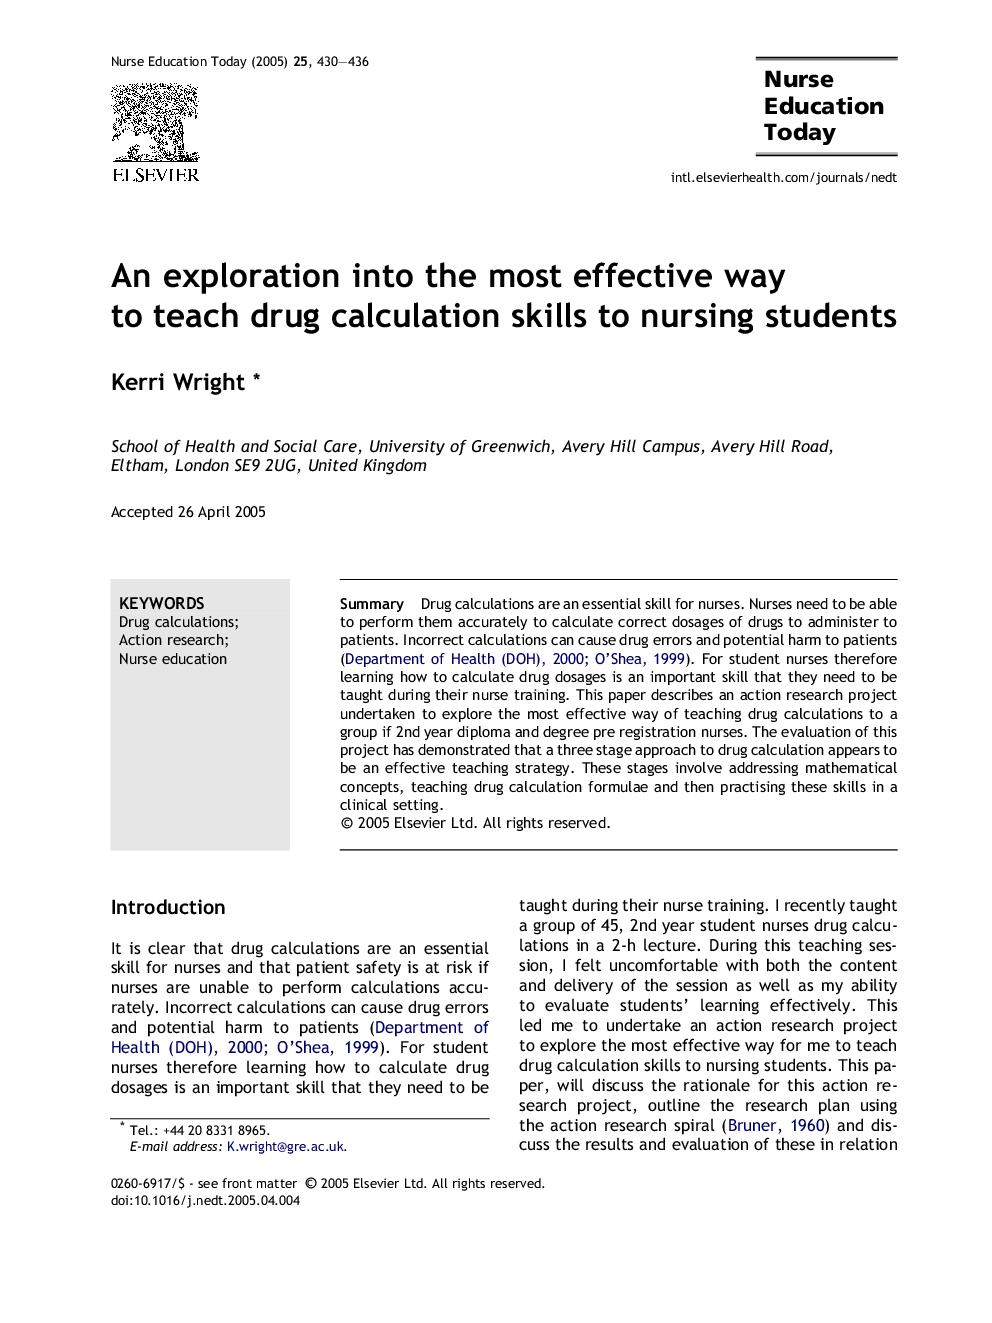 An exploration into the most effective way to teach drug calculation skills to nursing students